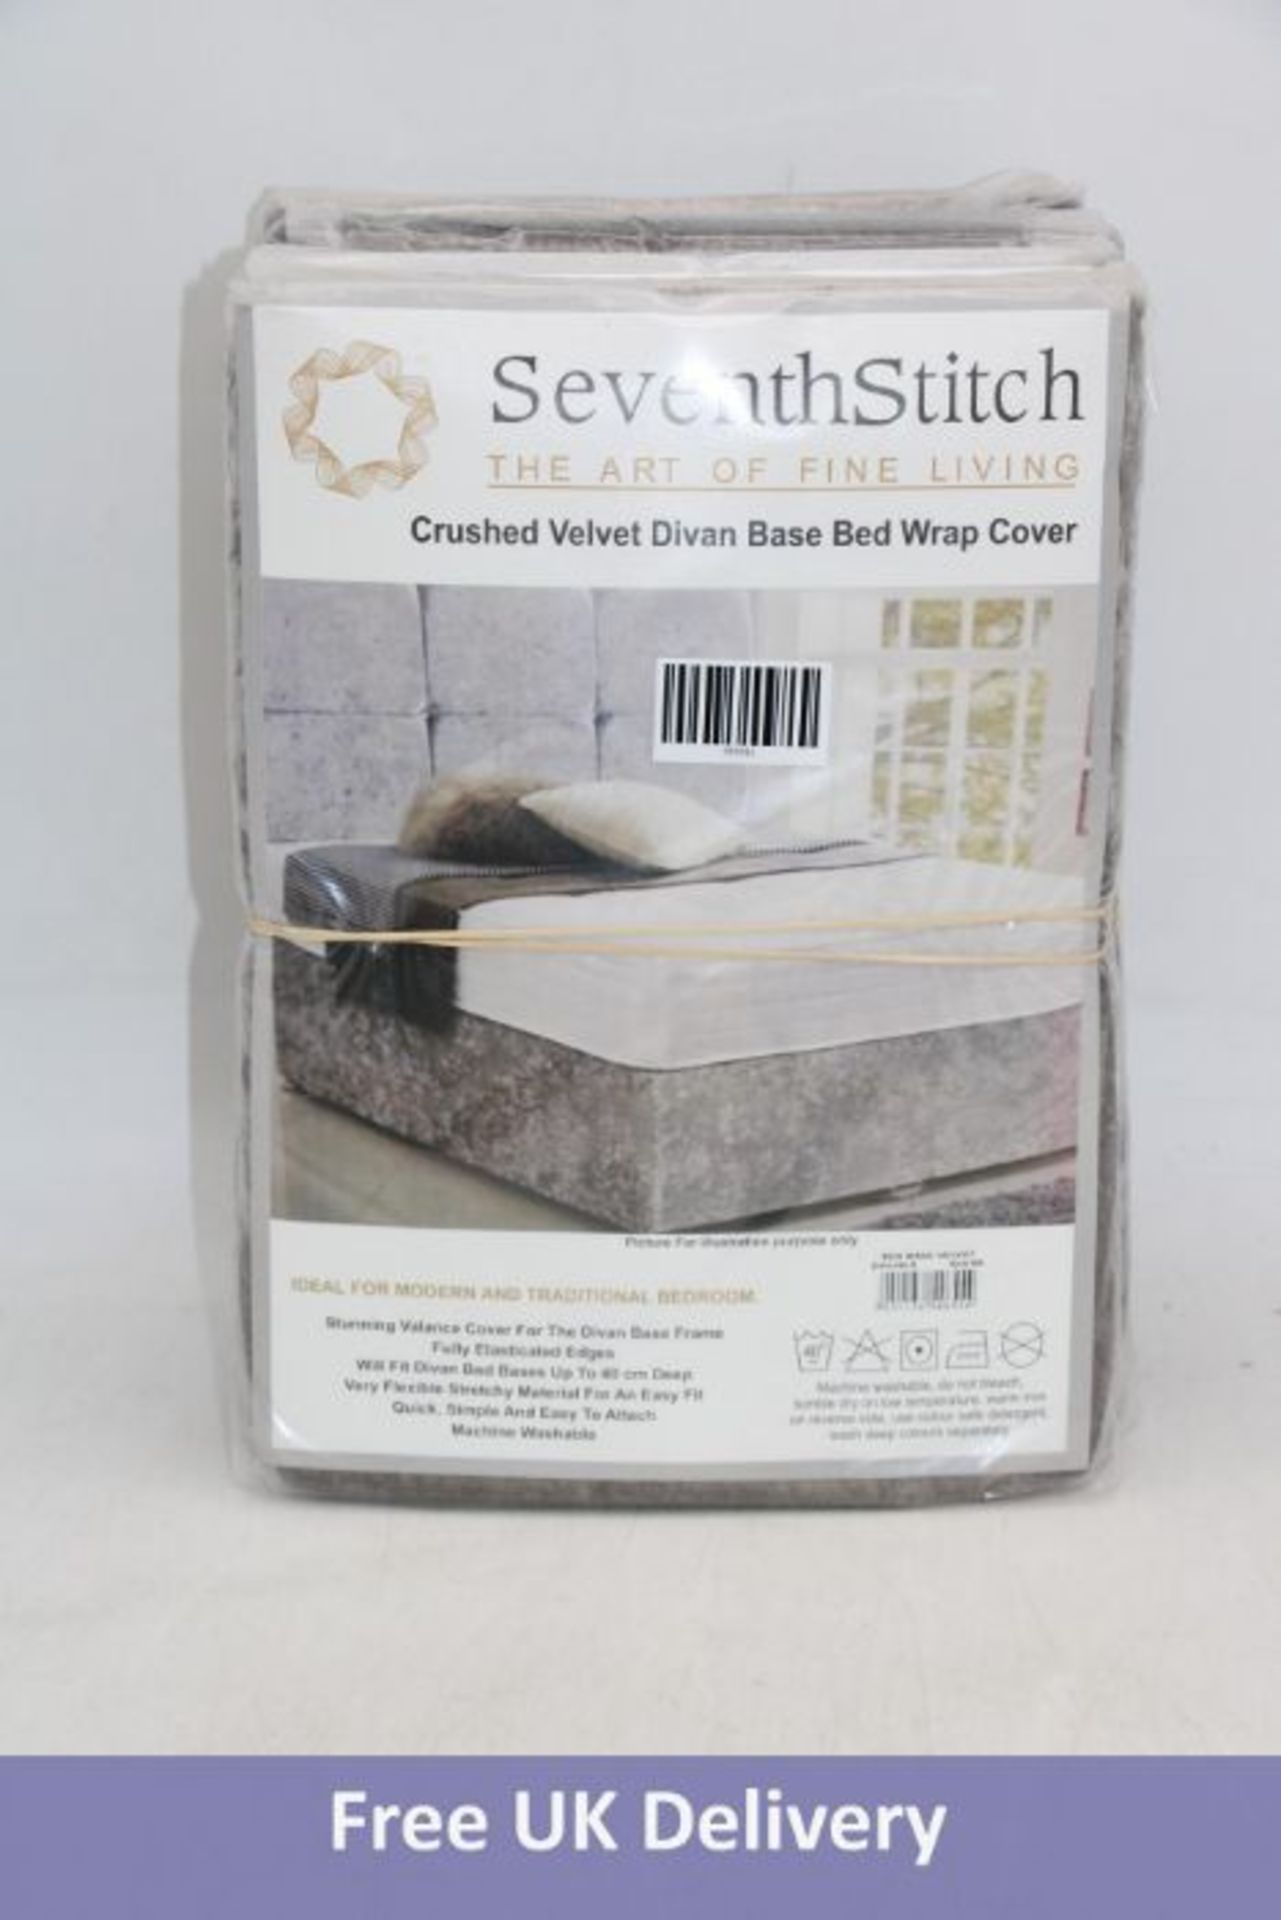 Four Seventh Stitch Crushed Velvet Divan Base Bed Wrap Cover, Silver, Double